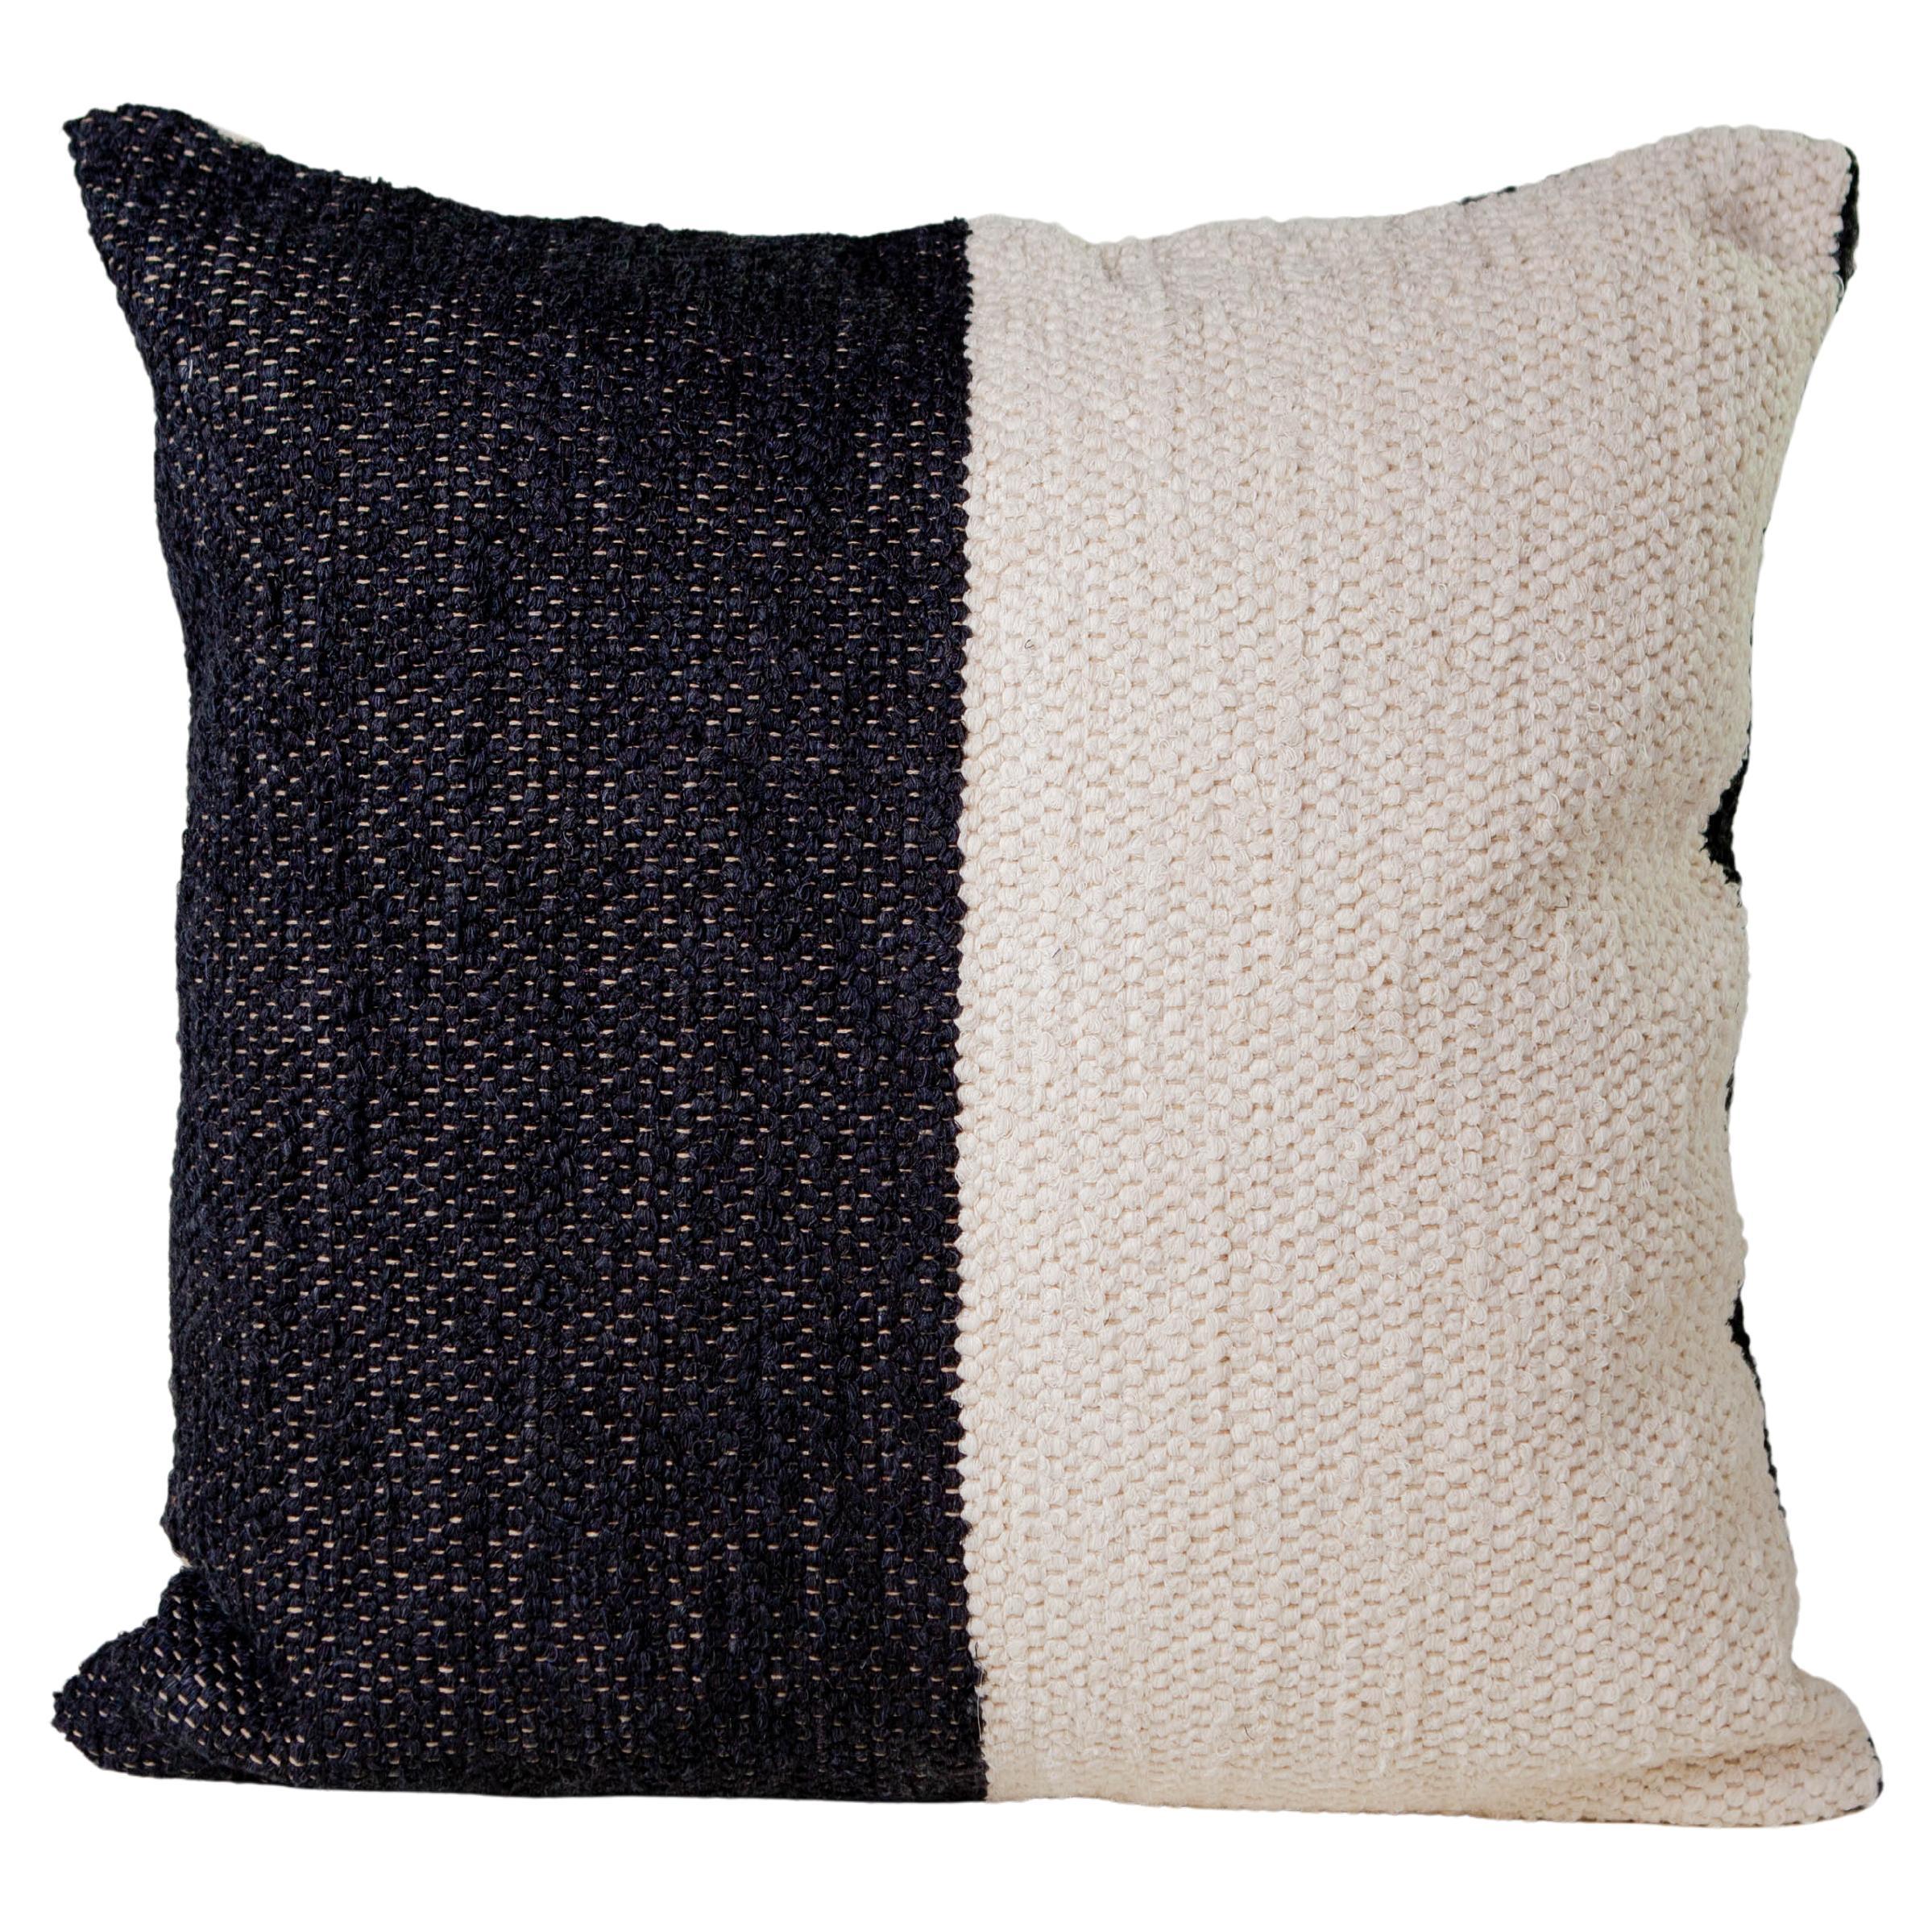 Casa Cubista Handwoven Cotton Black and White Color Block Throw Pillow, in Stock